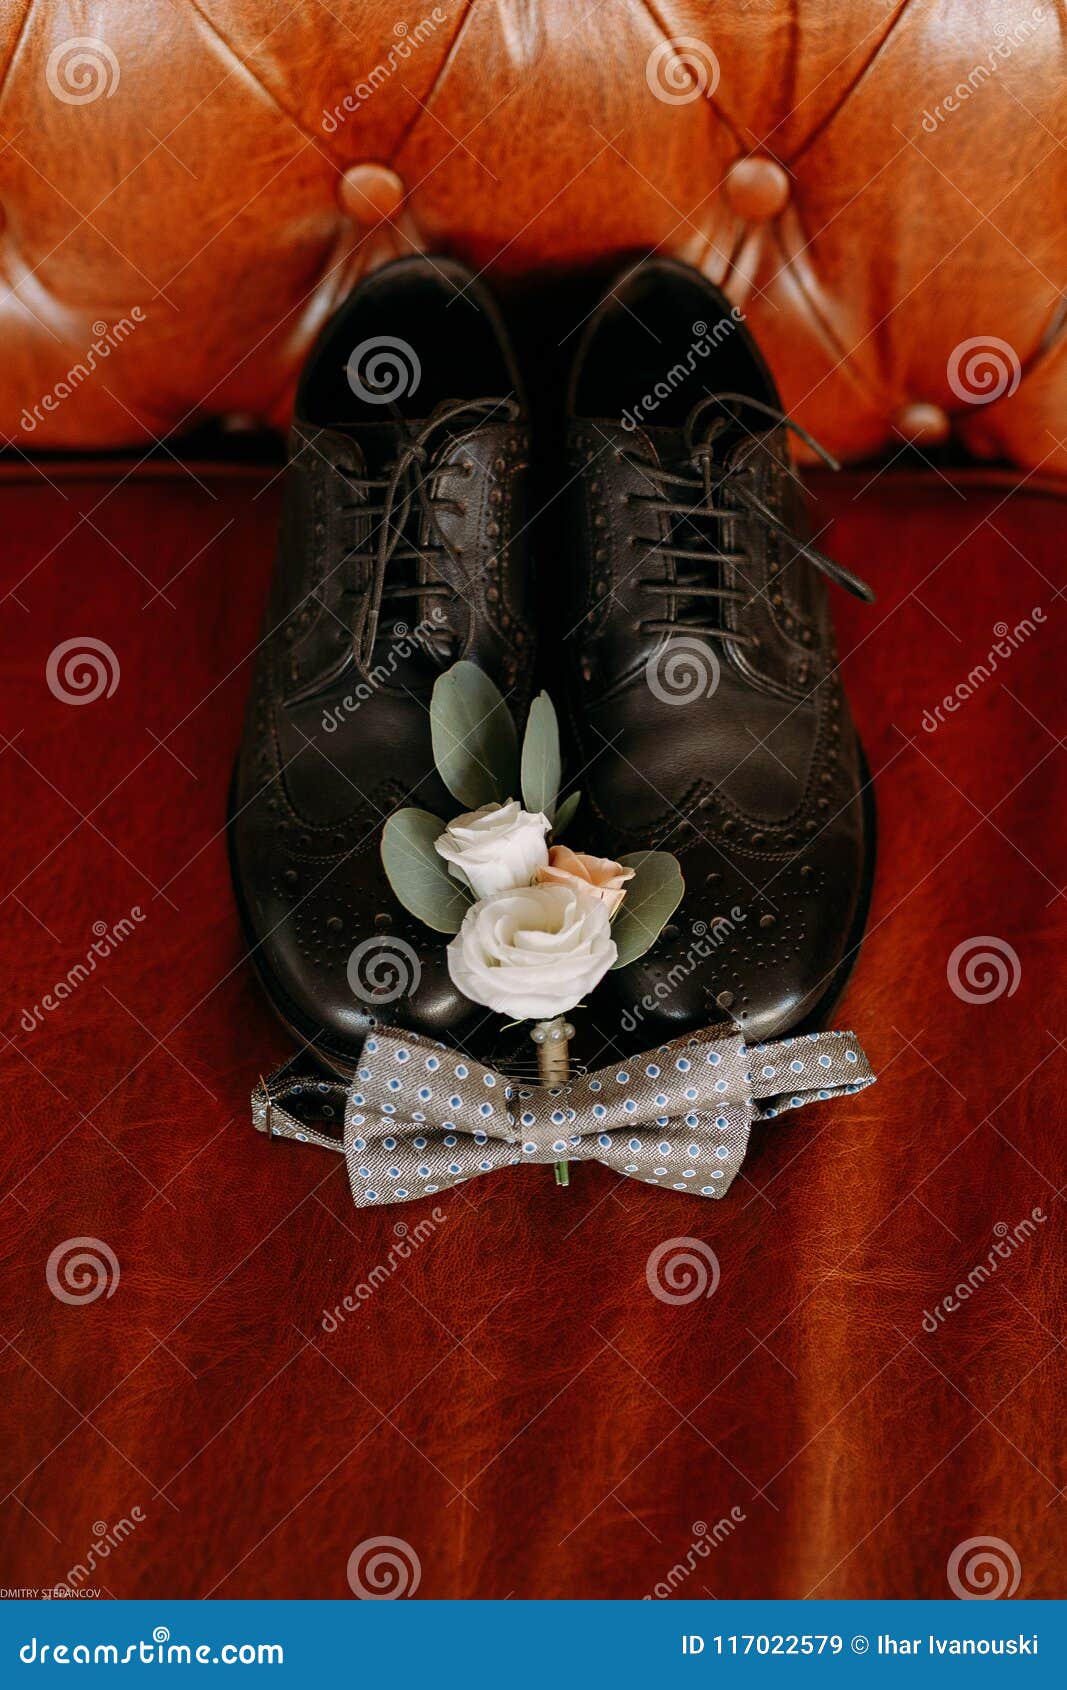 Men`s Black Wedding Shoes are Located on the Leather Sofa Stock Image ...